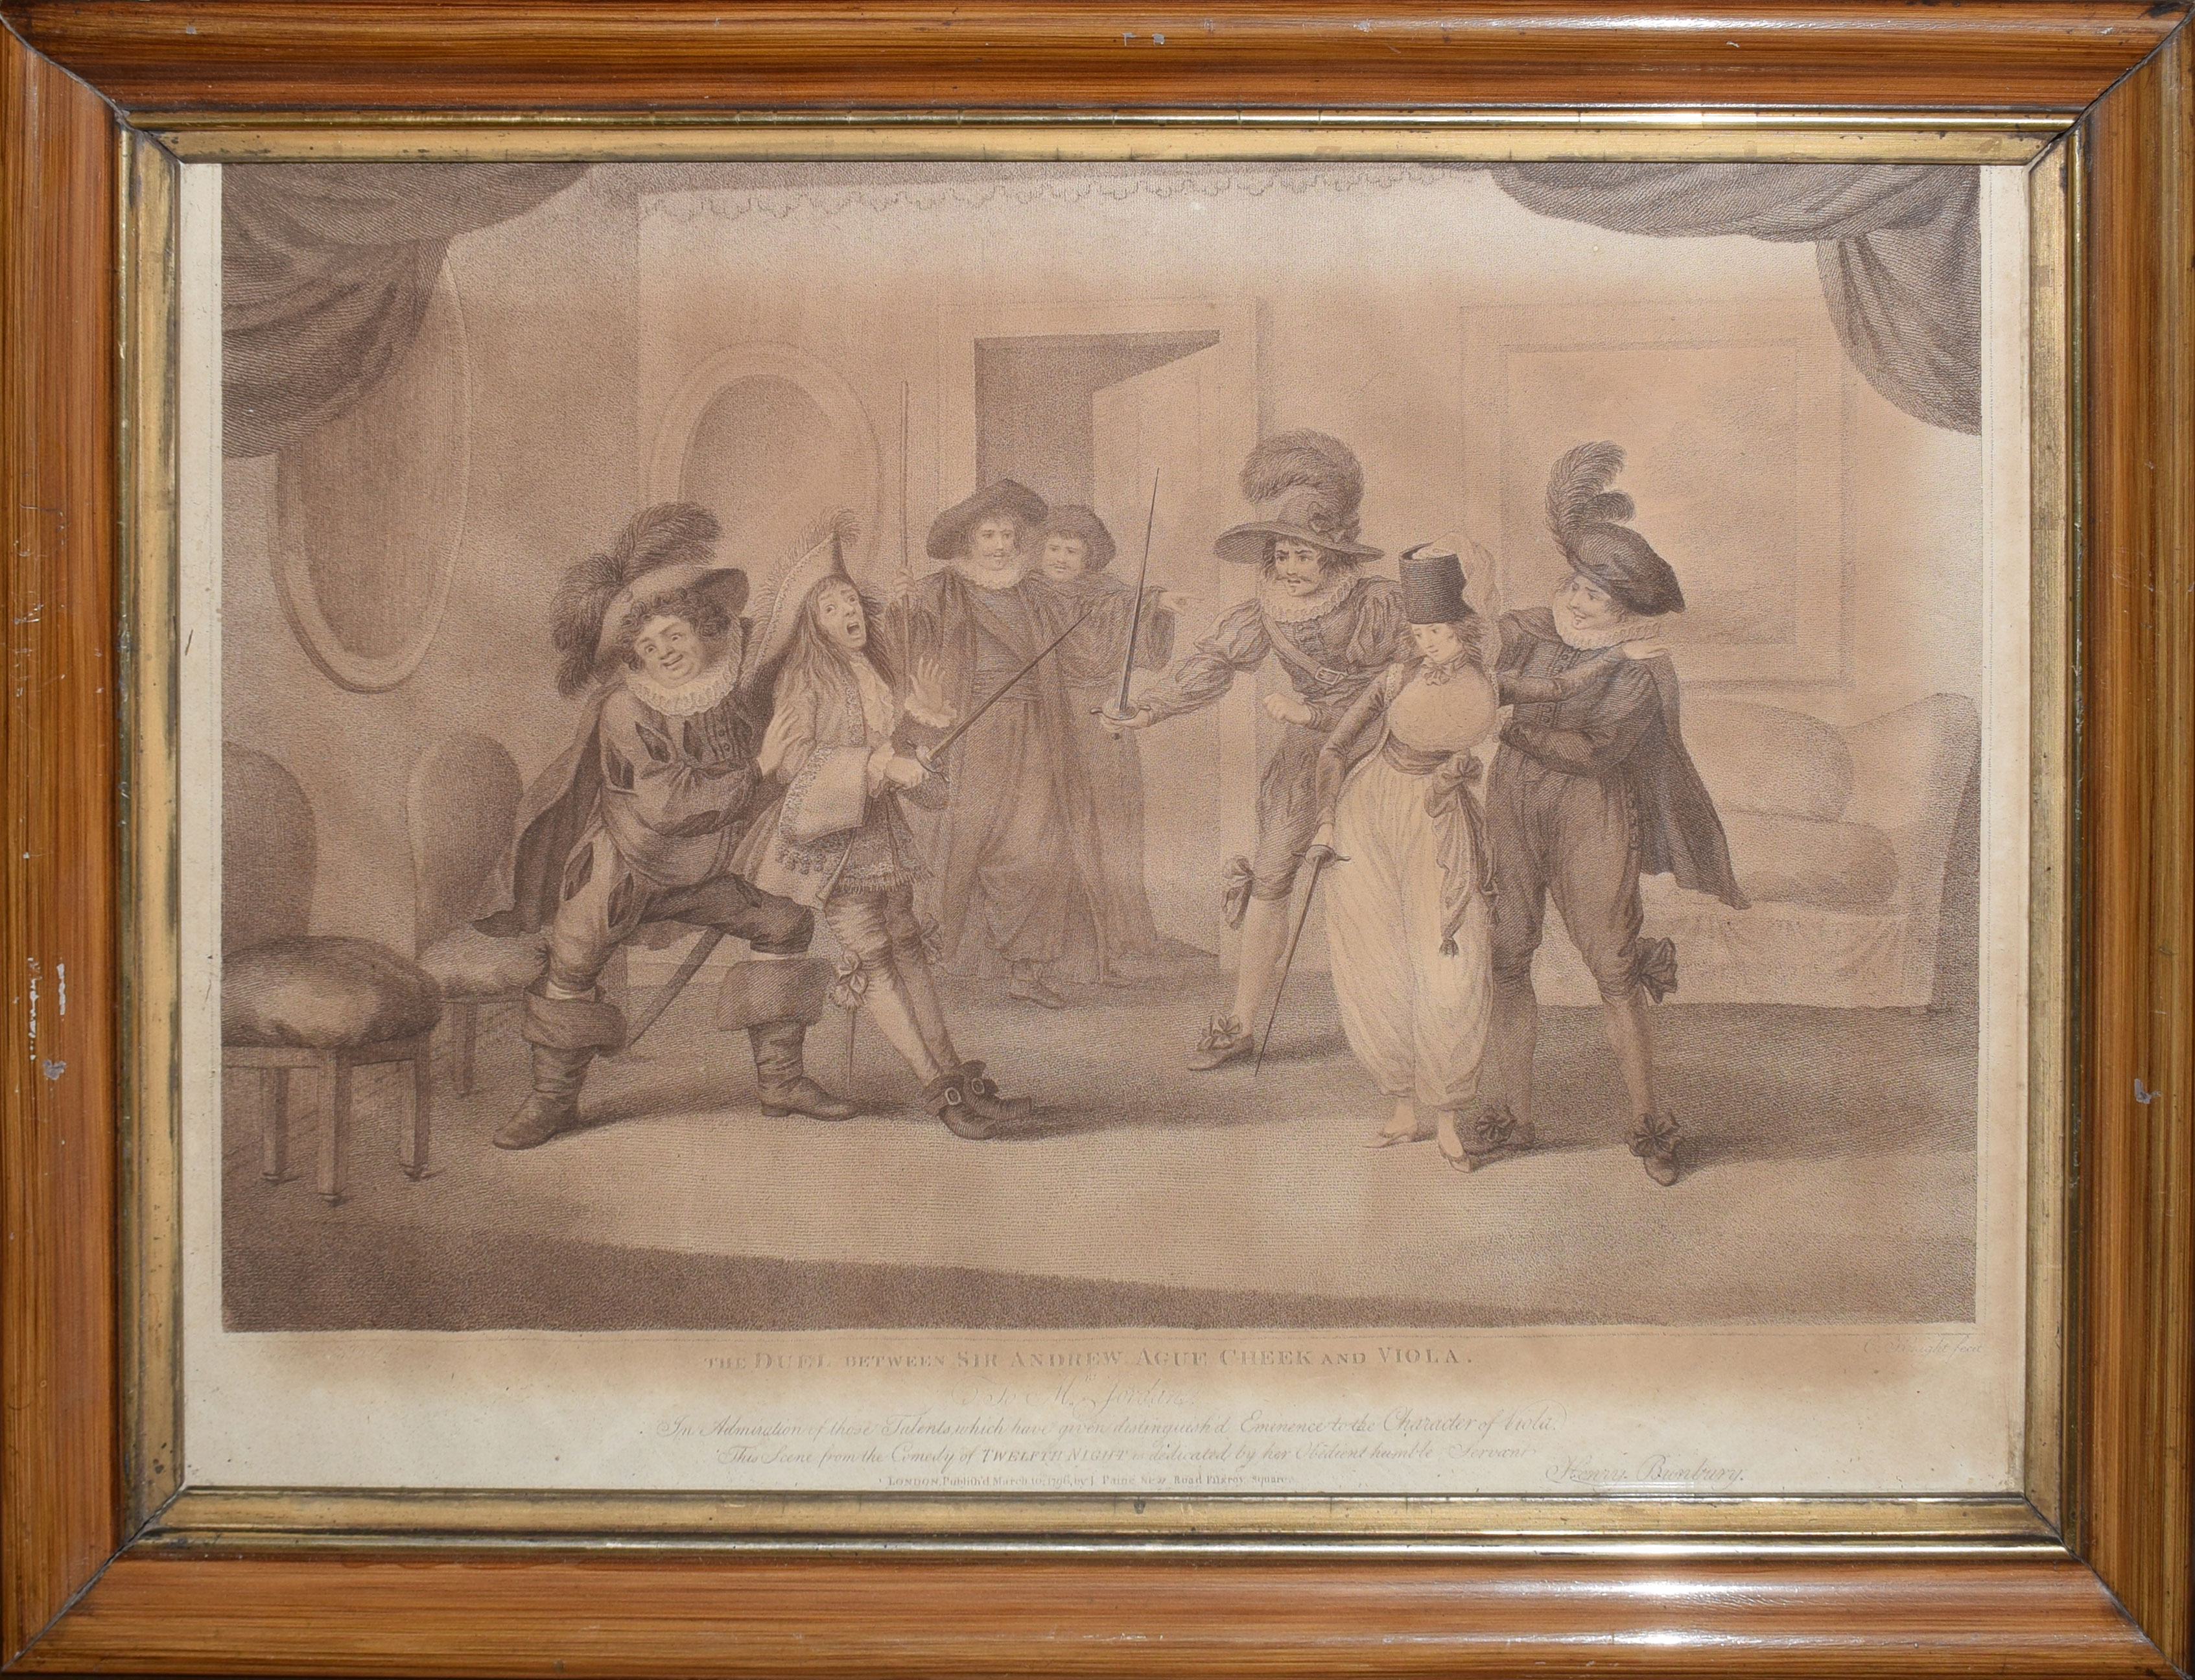 After H Bunbury, engraved by C Knight, "As you like it" and "The Dual between Sir Andrew Ague - Image 2 of 2